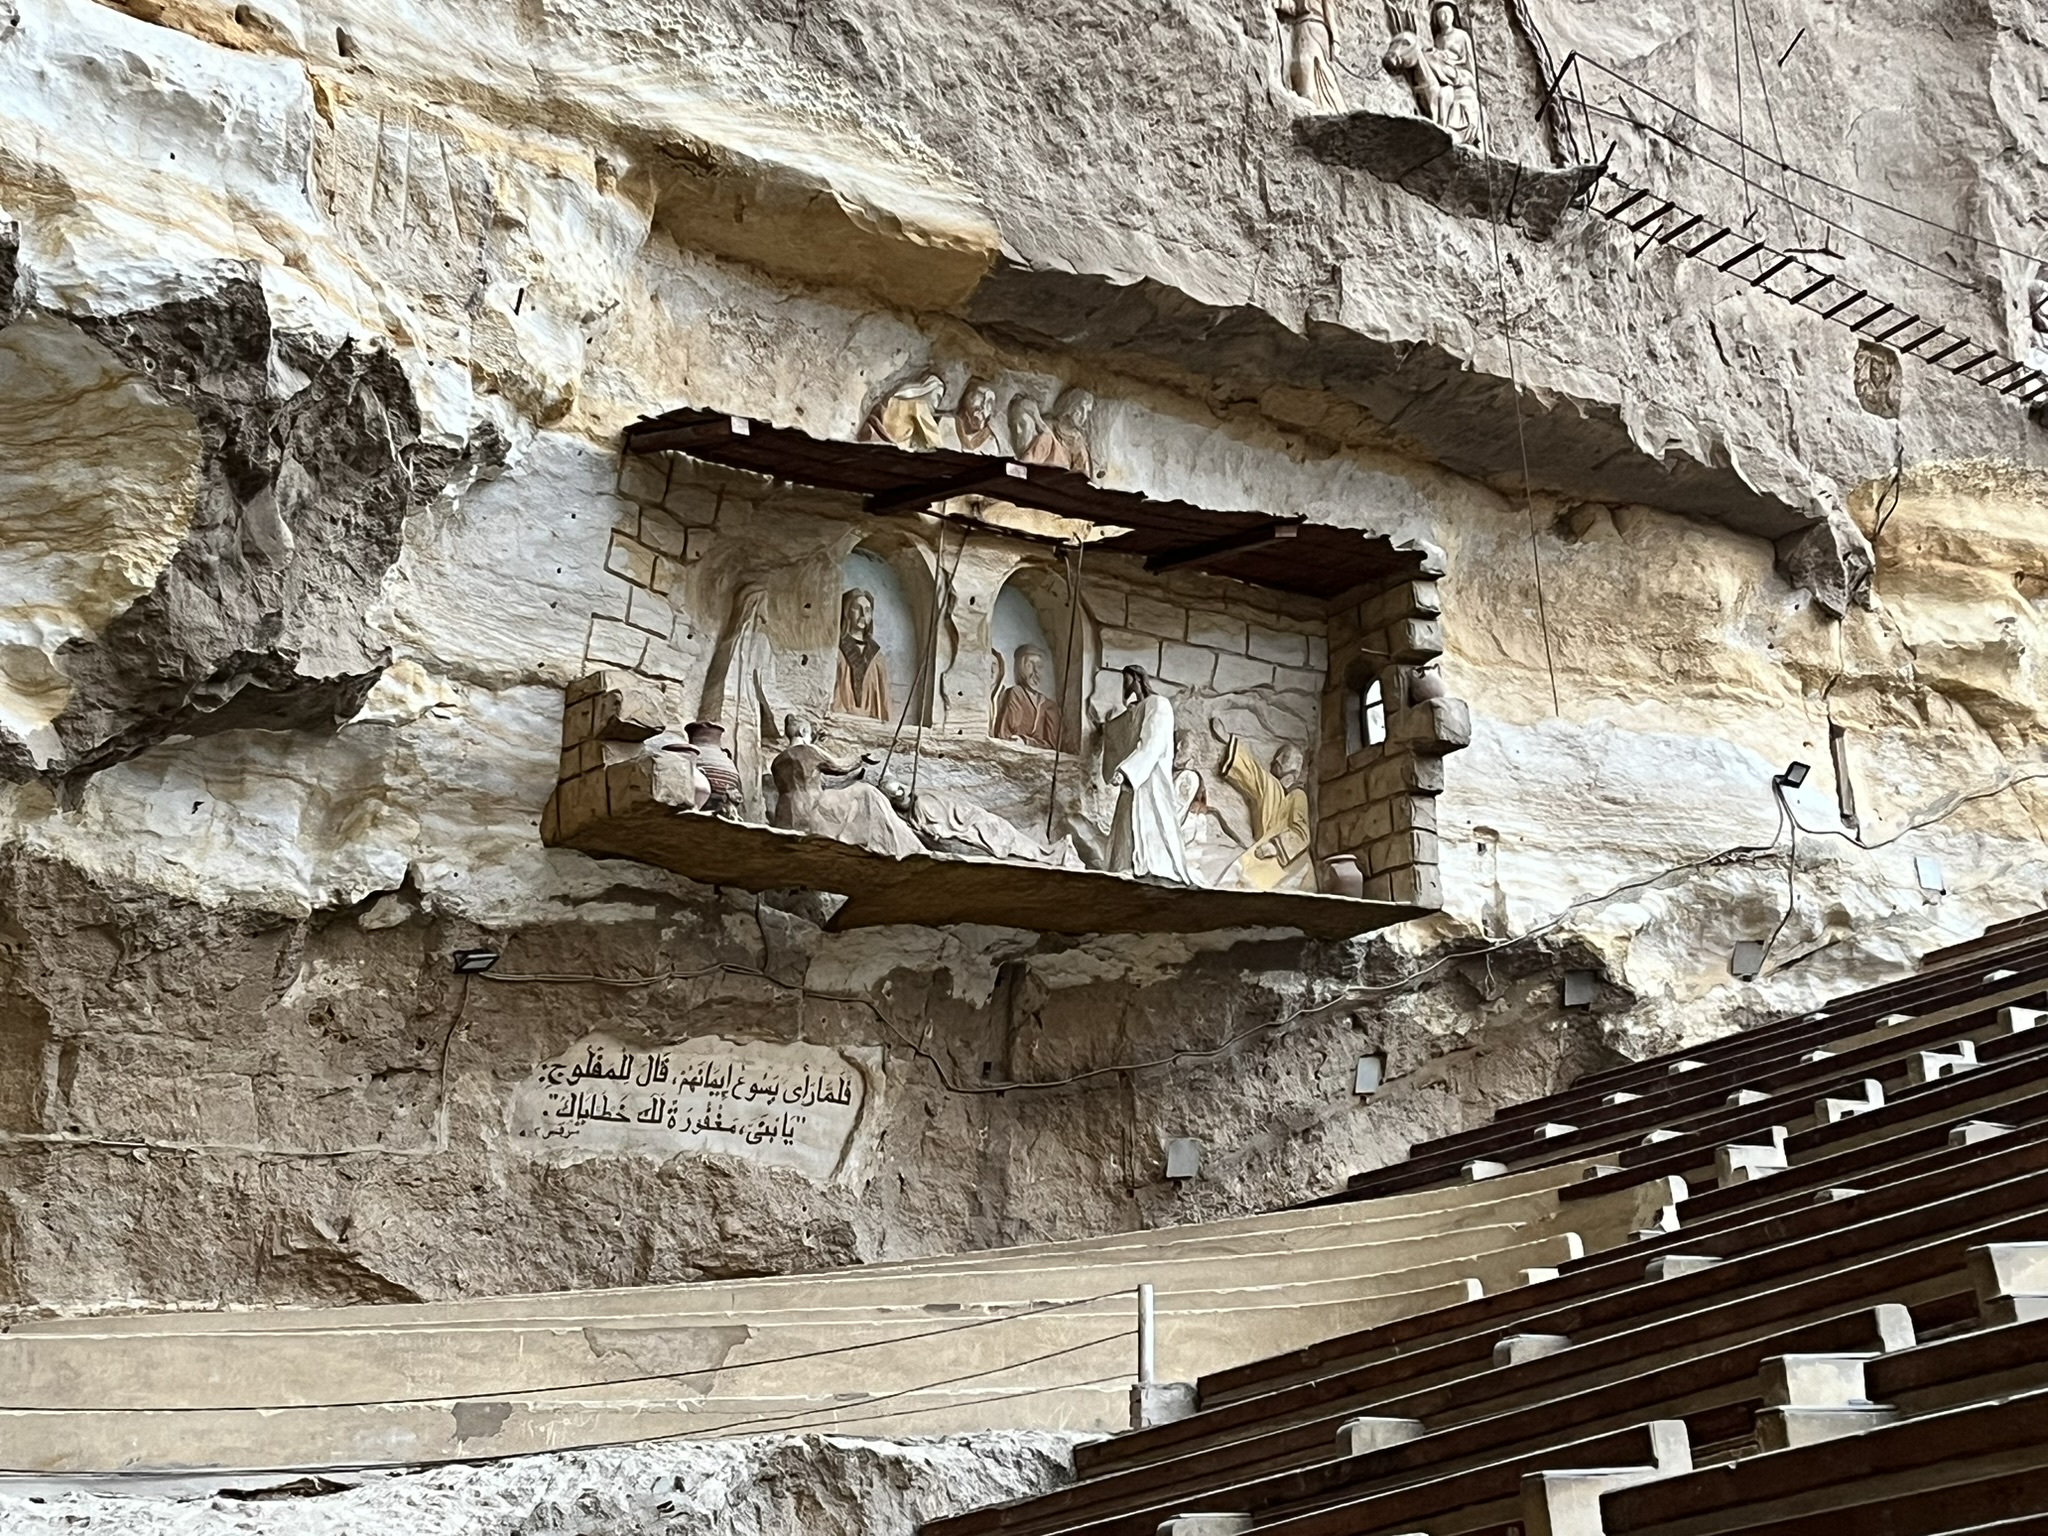 A bible scene is carved into the wall of a cave, below which is seating.